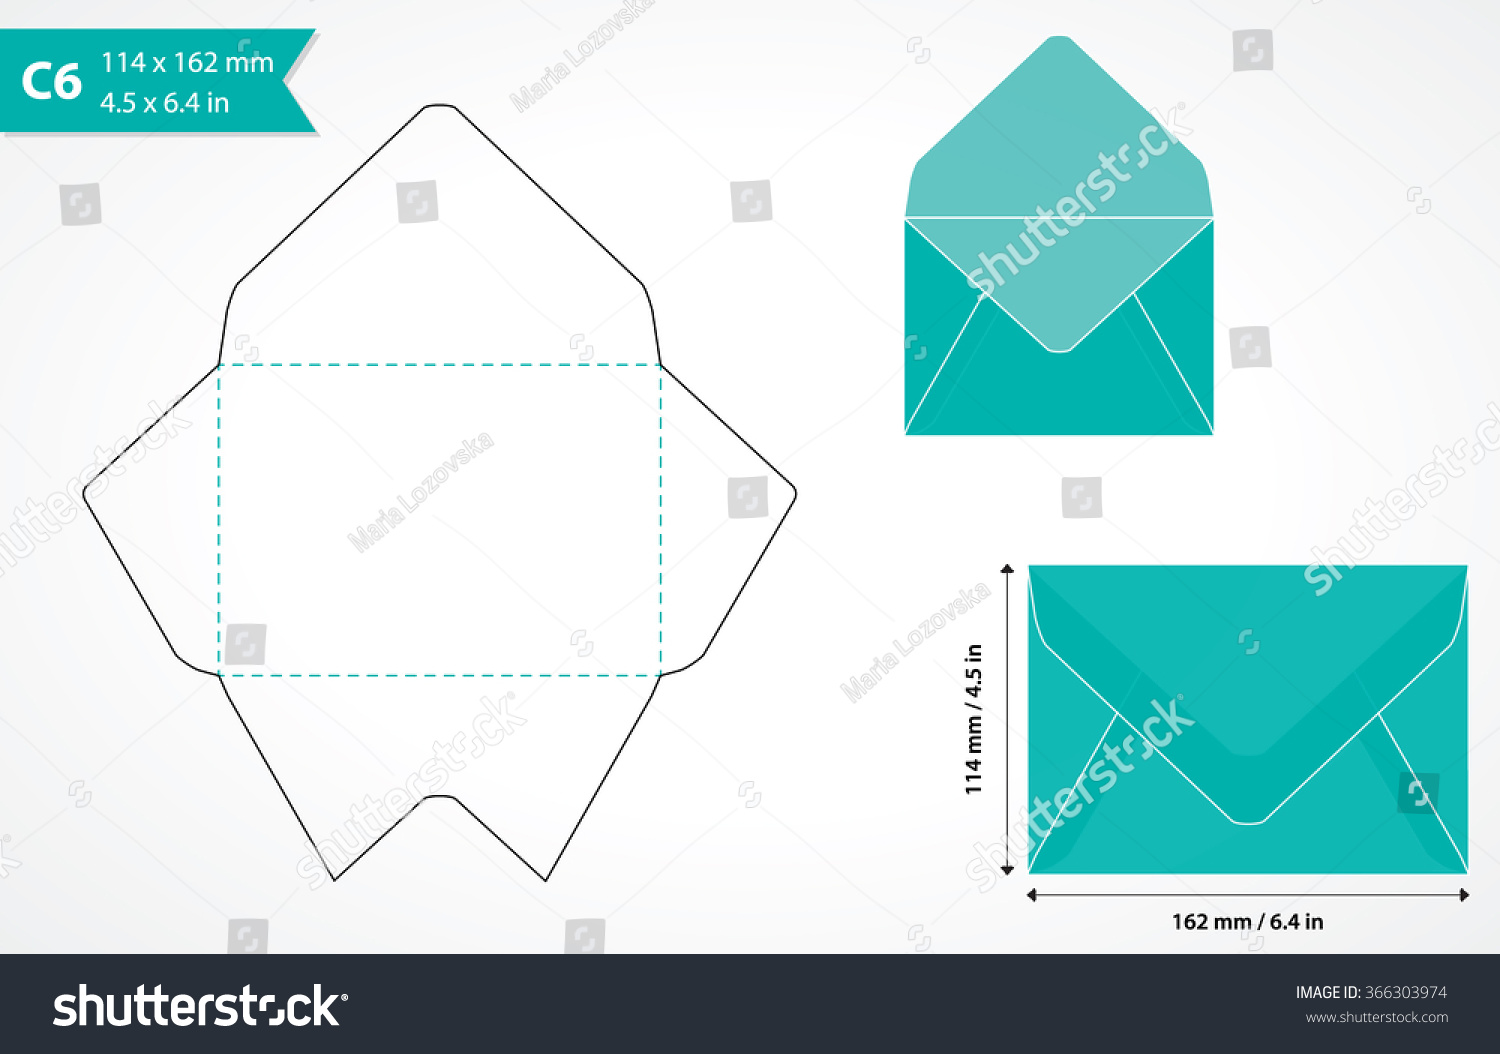 Cutout Paper Envelope Template Perfect Making Stock Vector Throughout Envelope Templates For Card Making